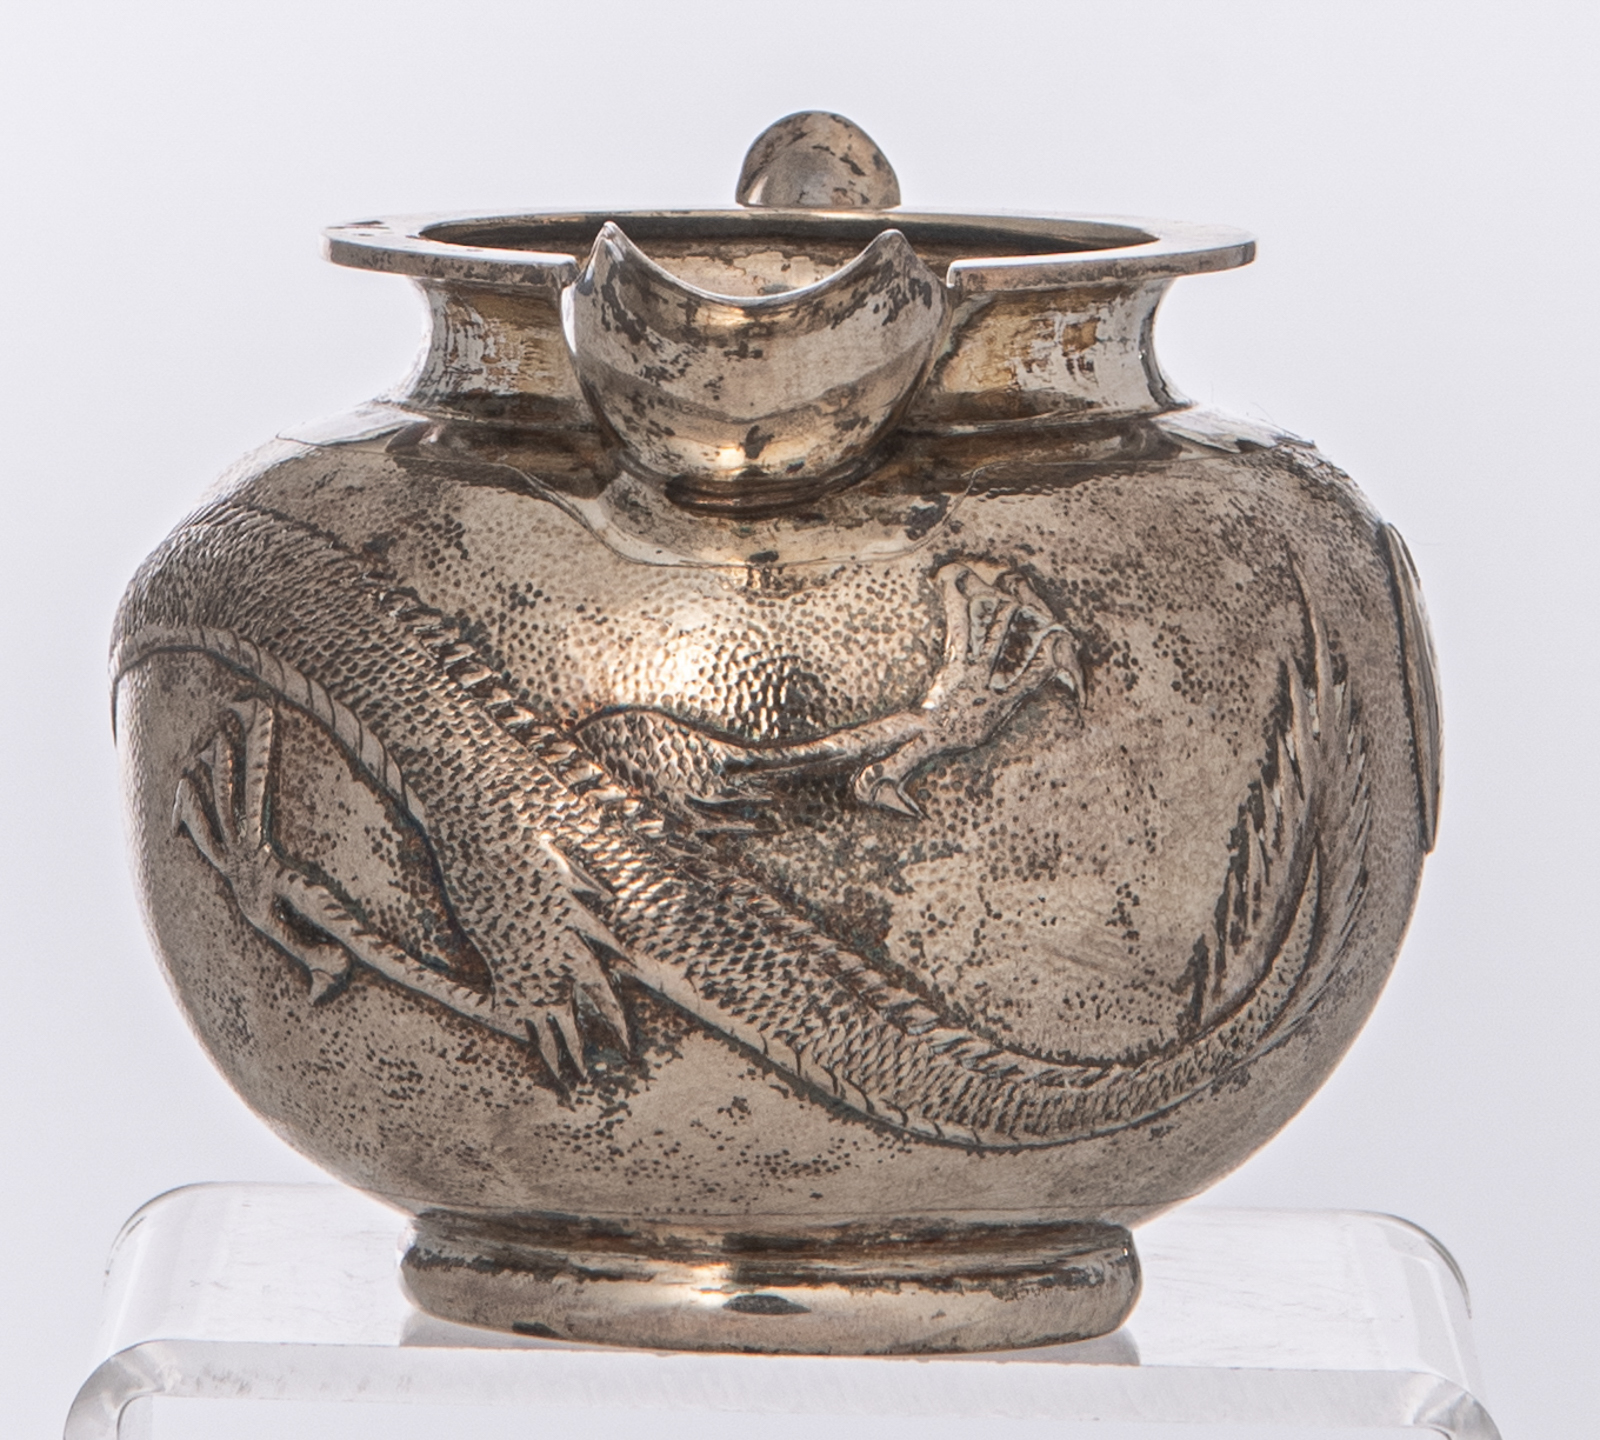 A Chinese three-piece silver tea set with dragon design, marked 'Yok Sang', Shanghai, H 4,5 - W 25,5 - Image 13 of 19